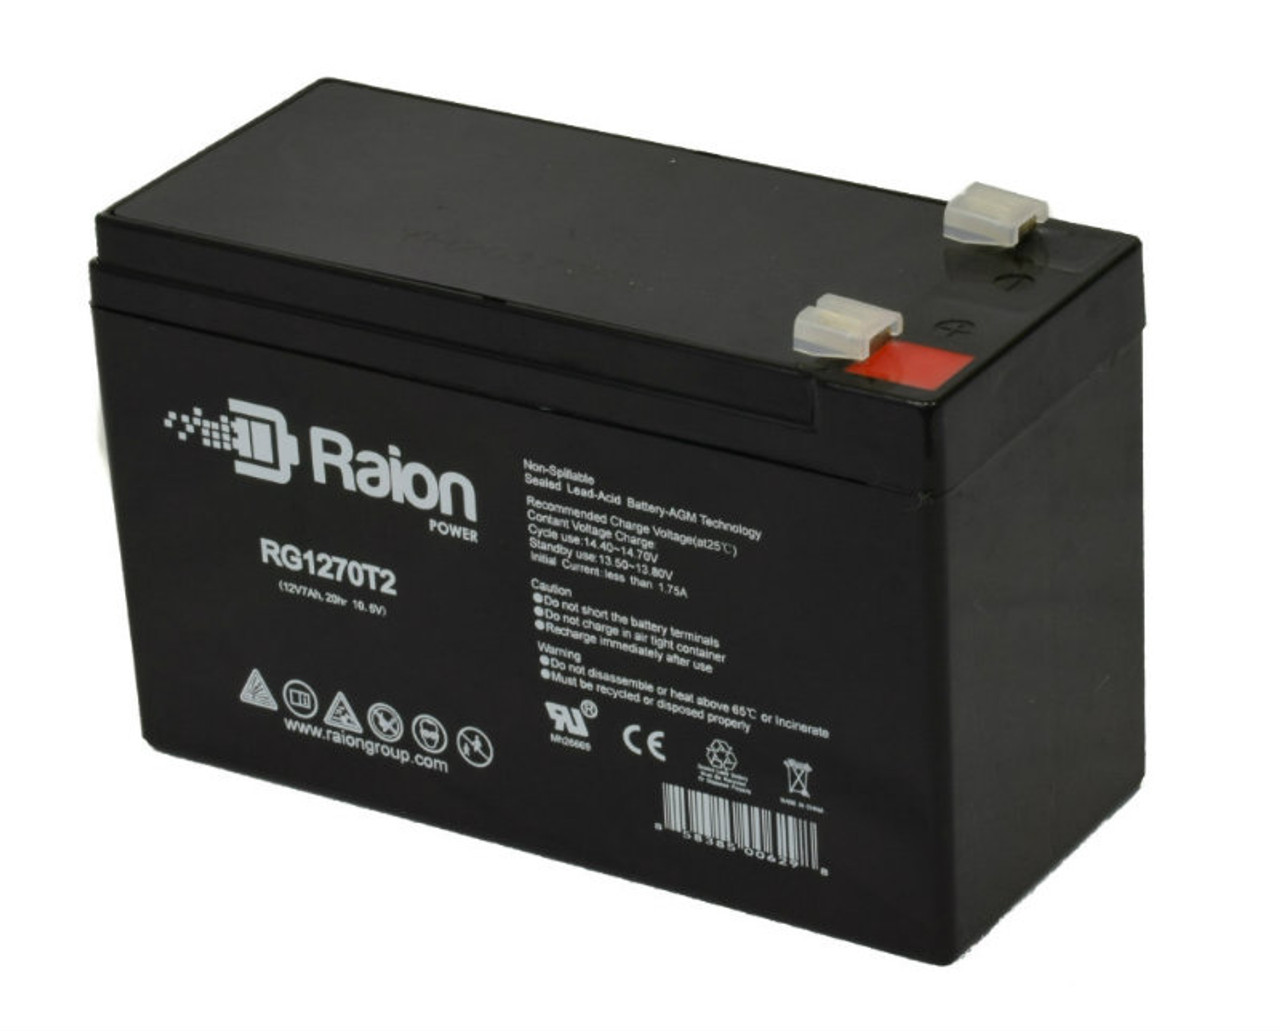 Raion Power RG1270T1 12V 7Ah Non-Spillable Replacement Battery for SSB SB 7-12L F1